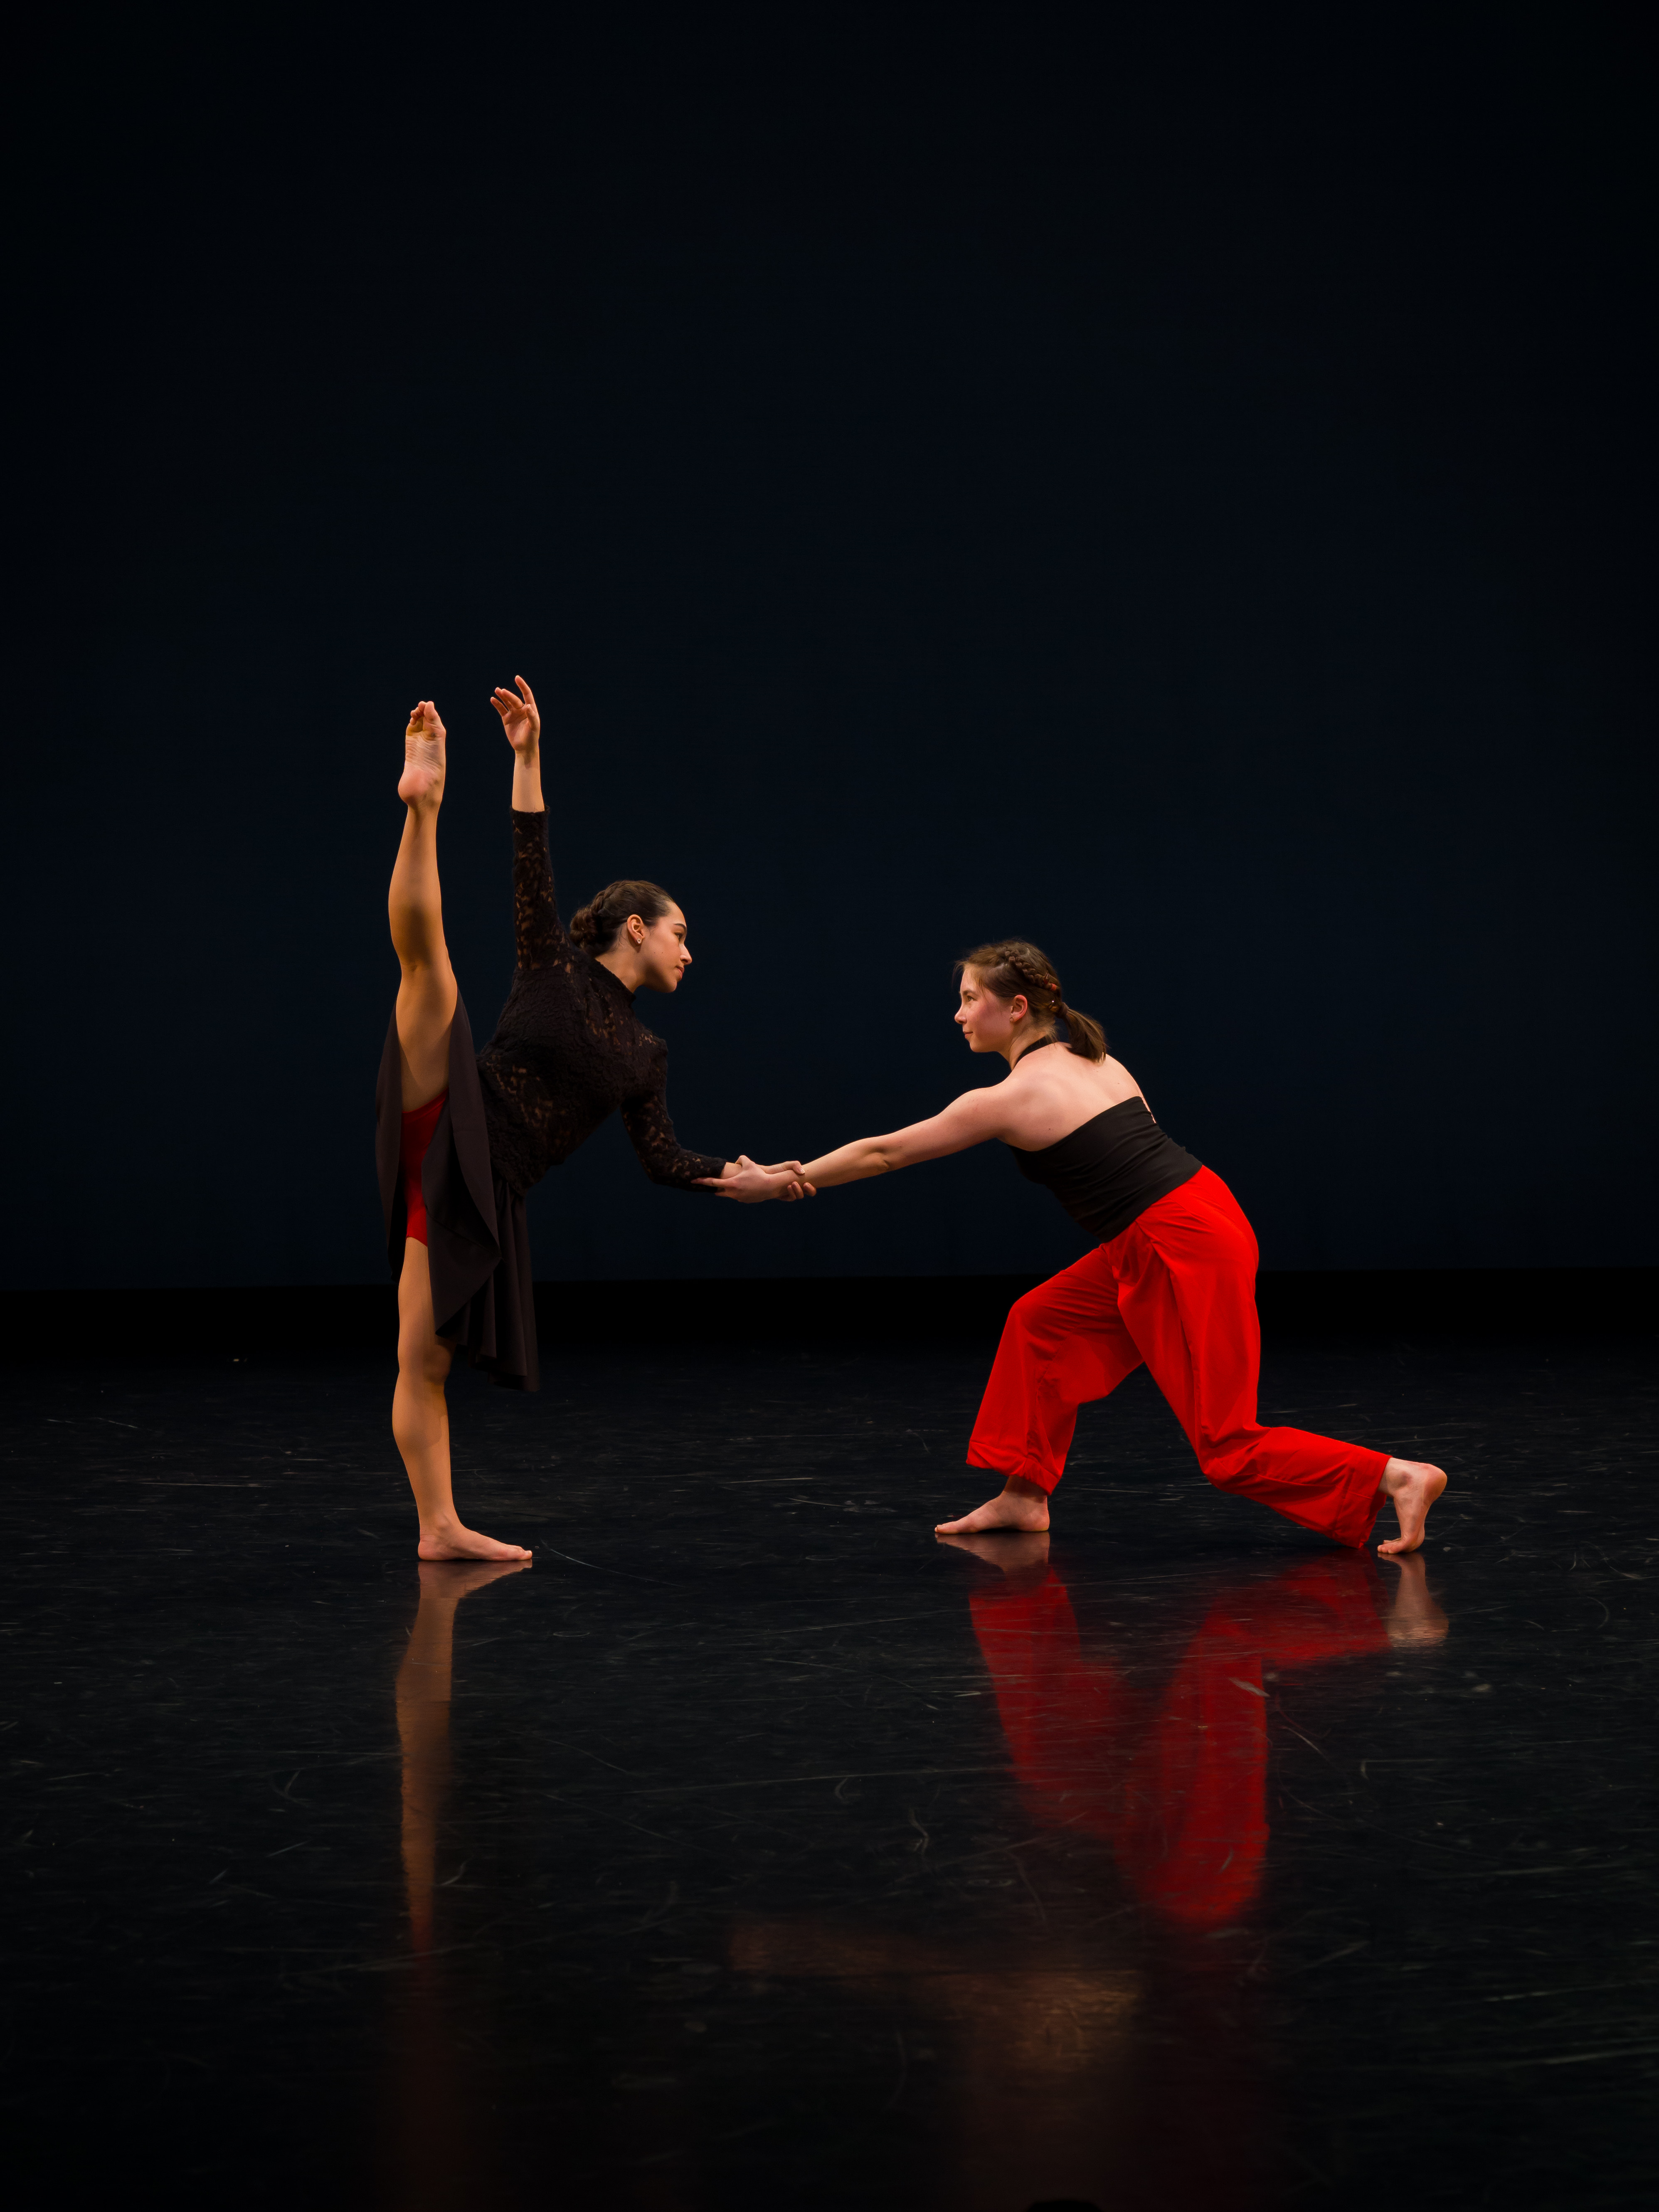 Two dancers hold hands while performing on a dark stage.